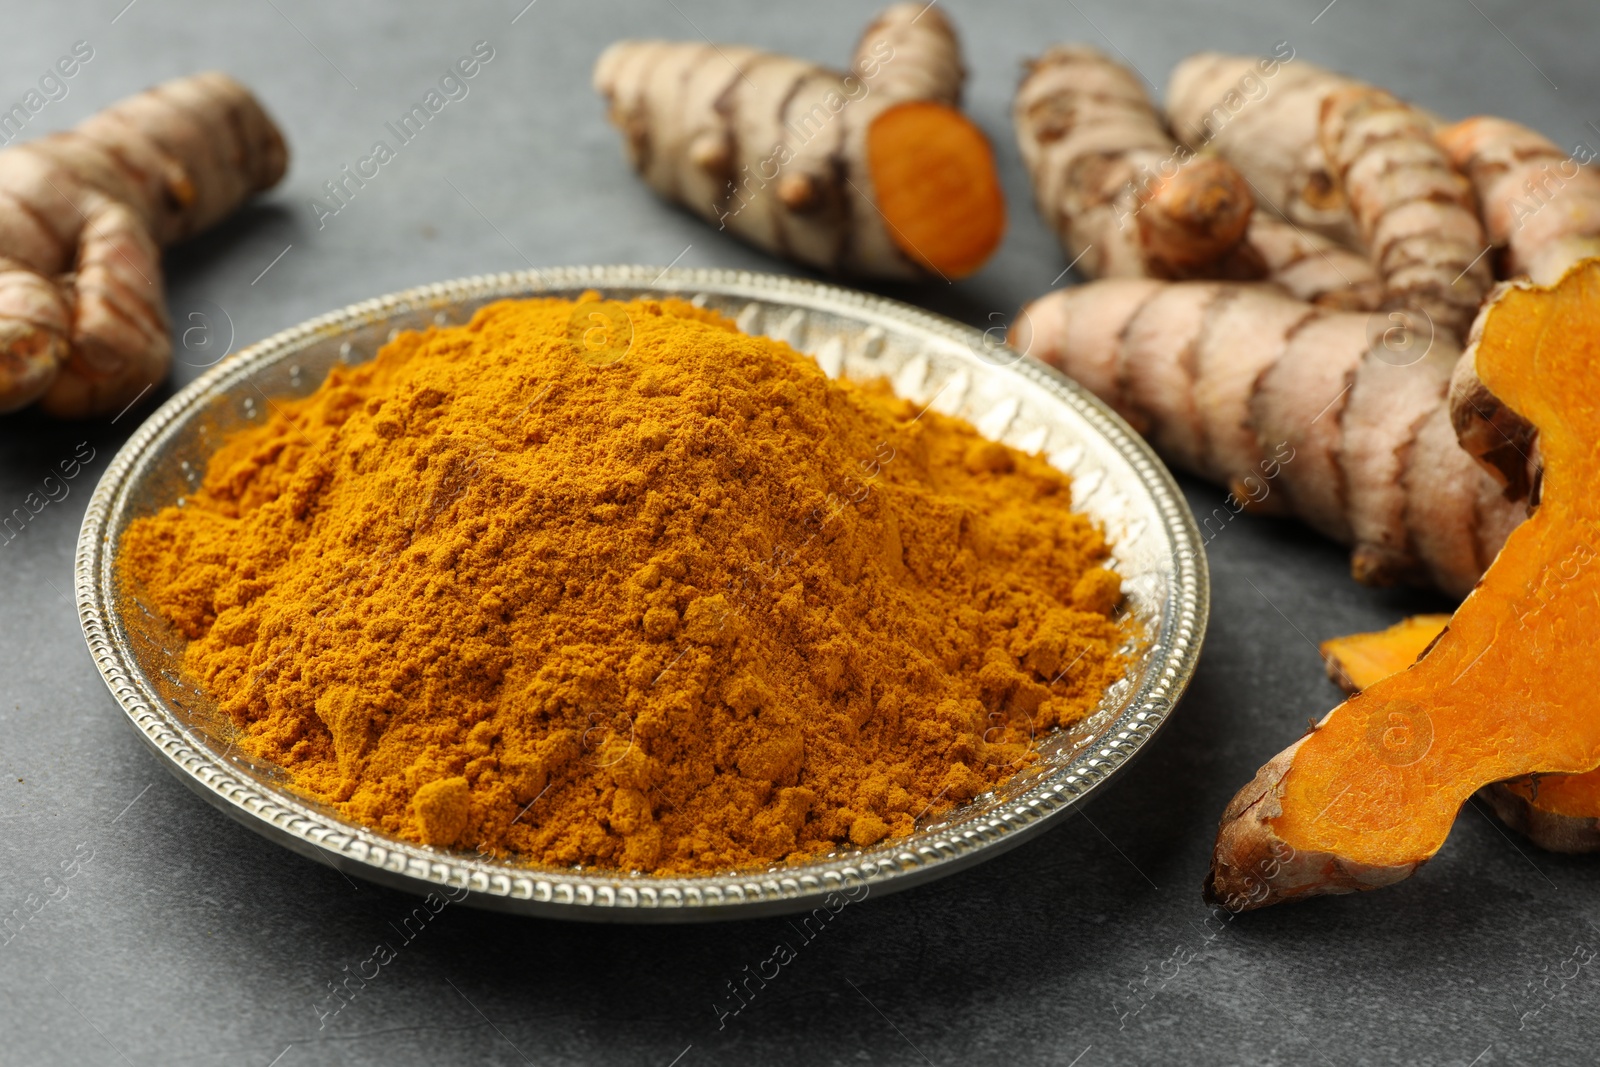 Photo of Plate with turmeric powder and raw roots on grey table, closeup